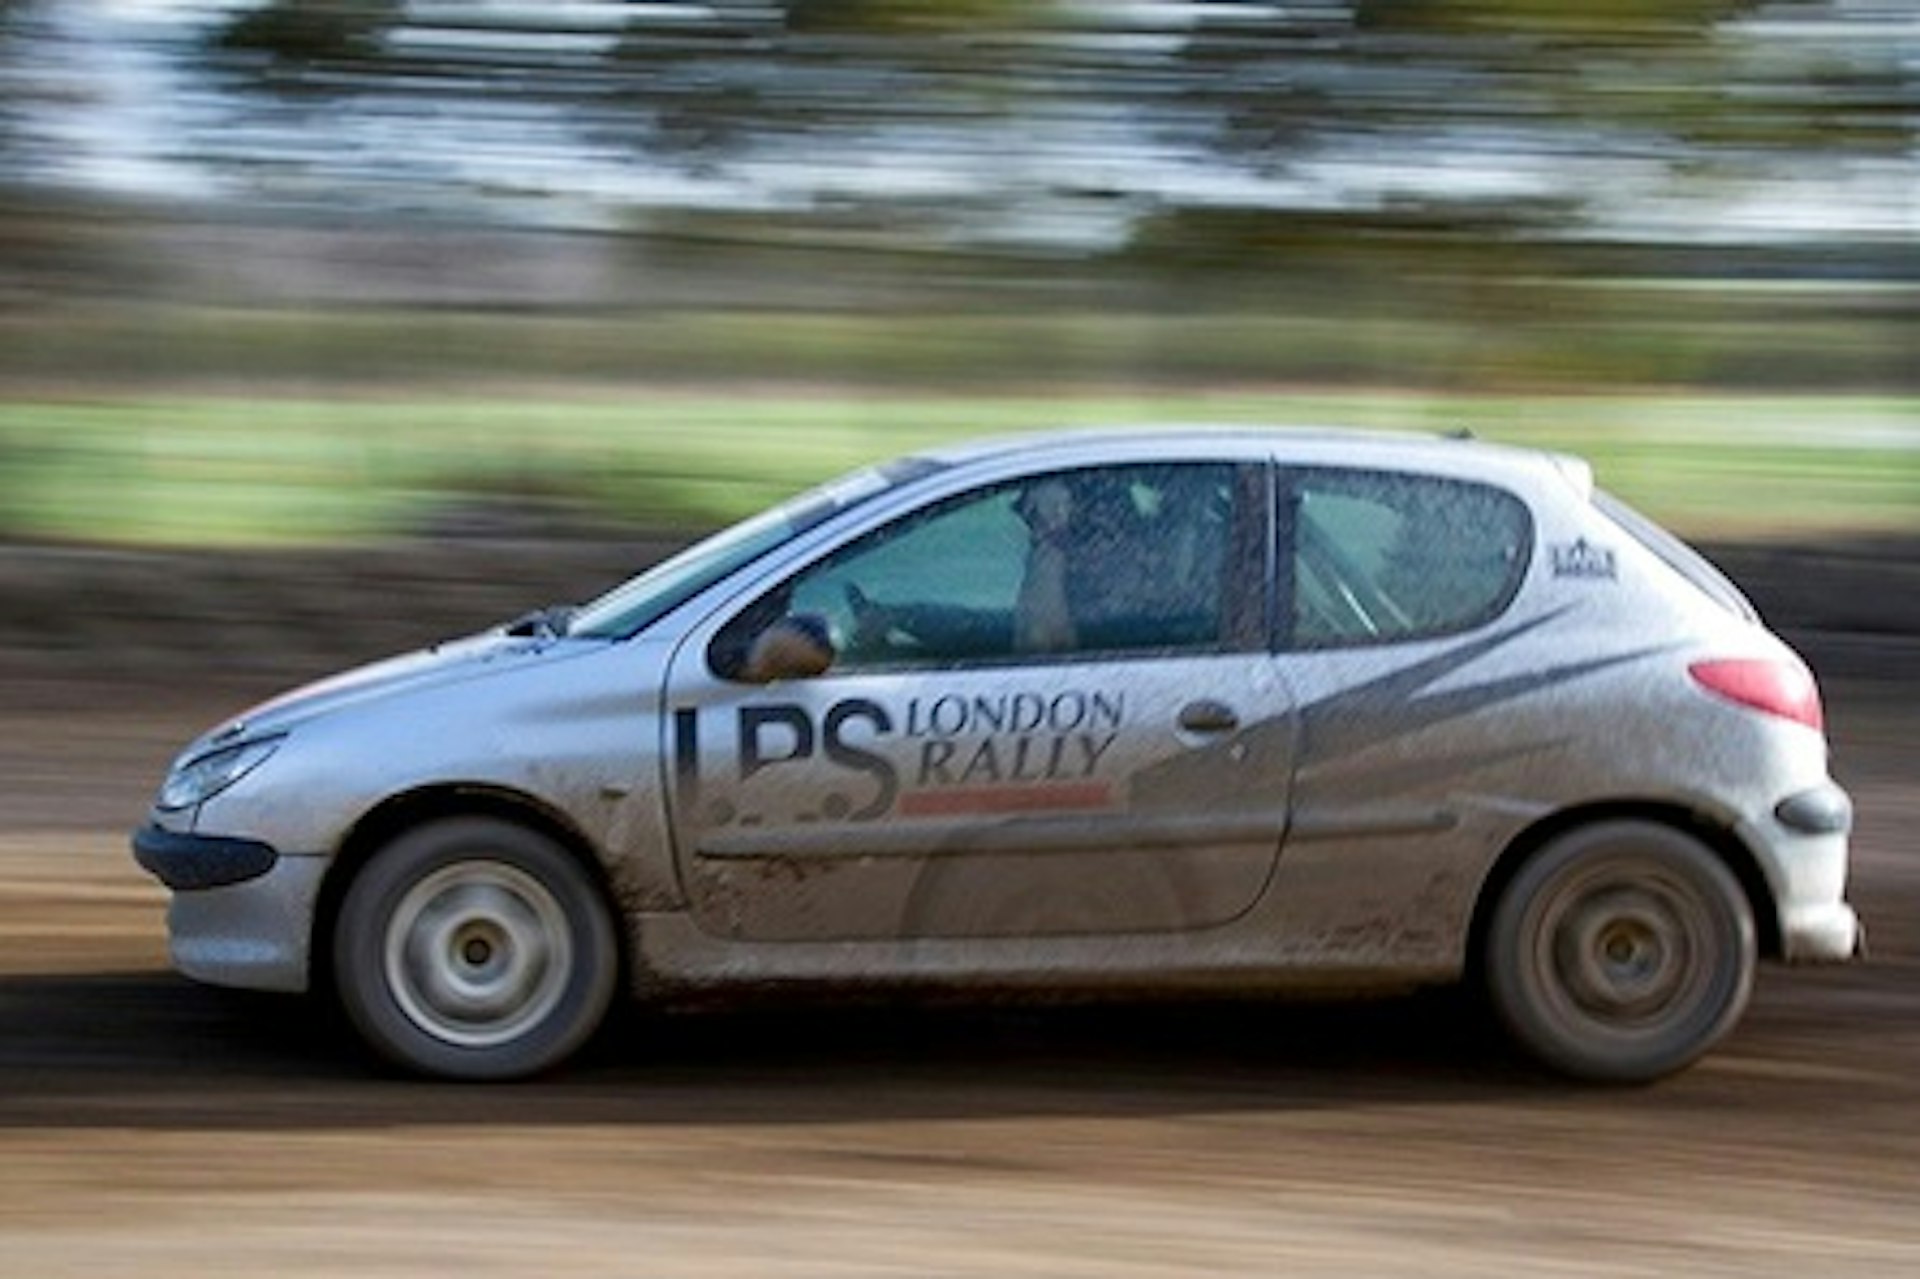 Full Day Three Car Rally Challenge Driving Experience 3